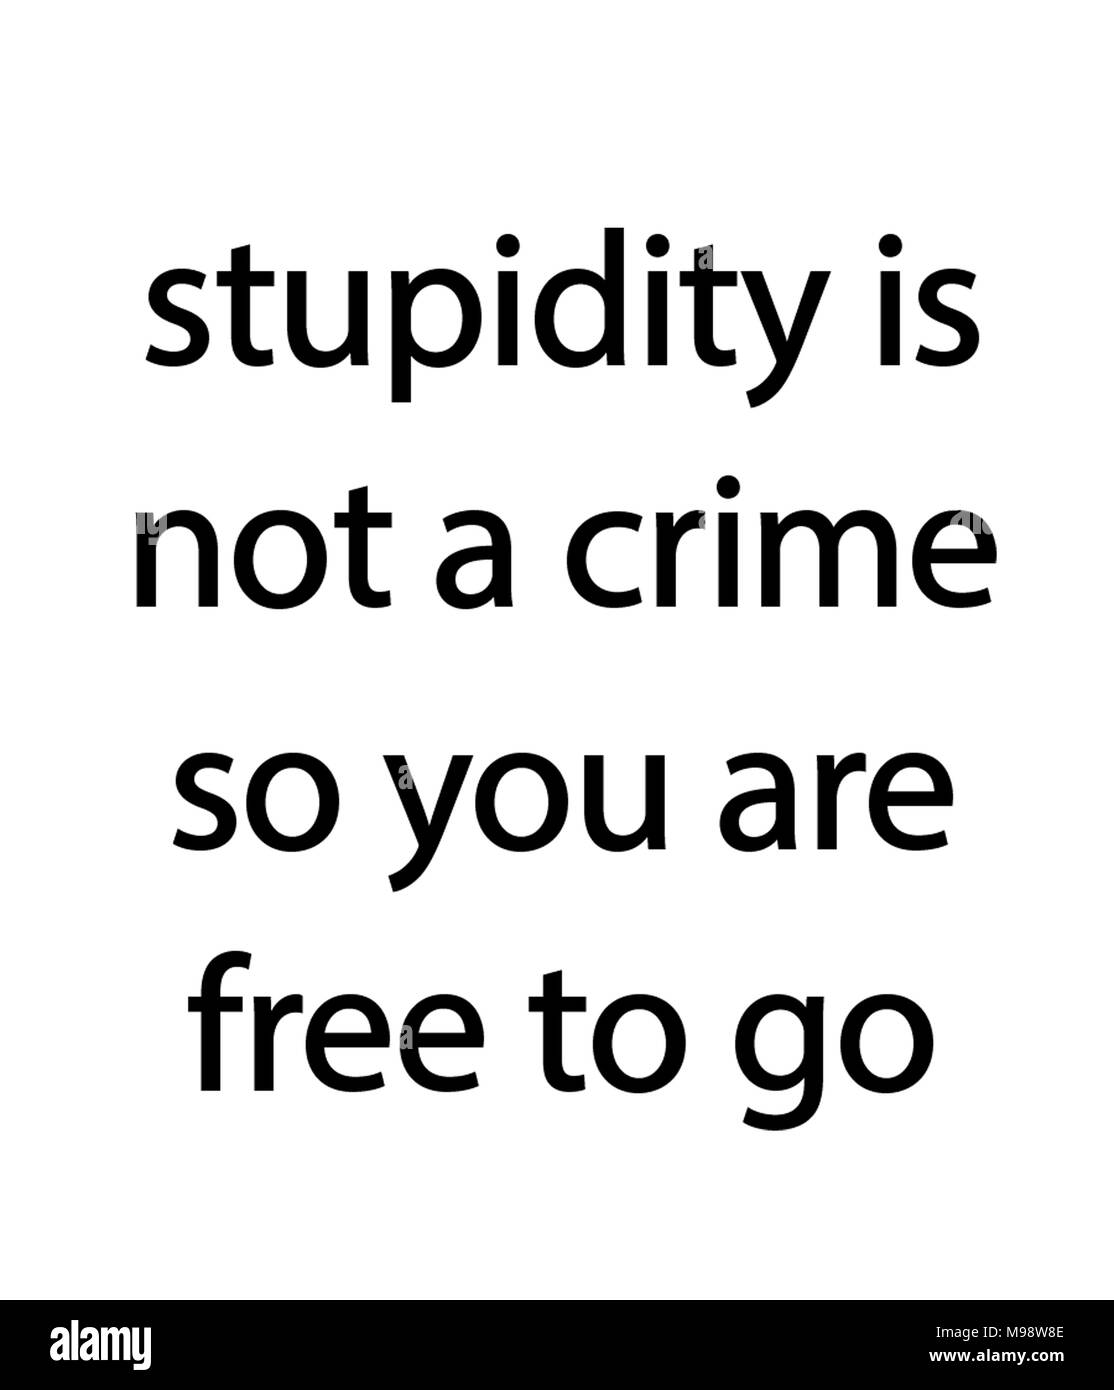 Stupidity is not a crime so you are free to go Stock Photo